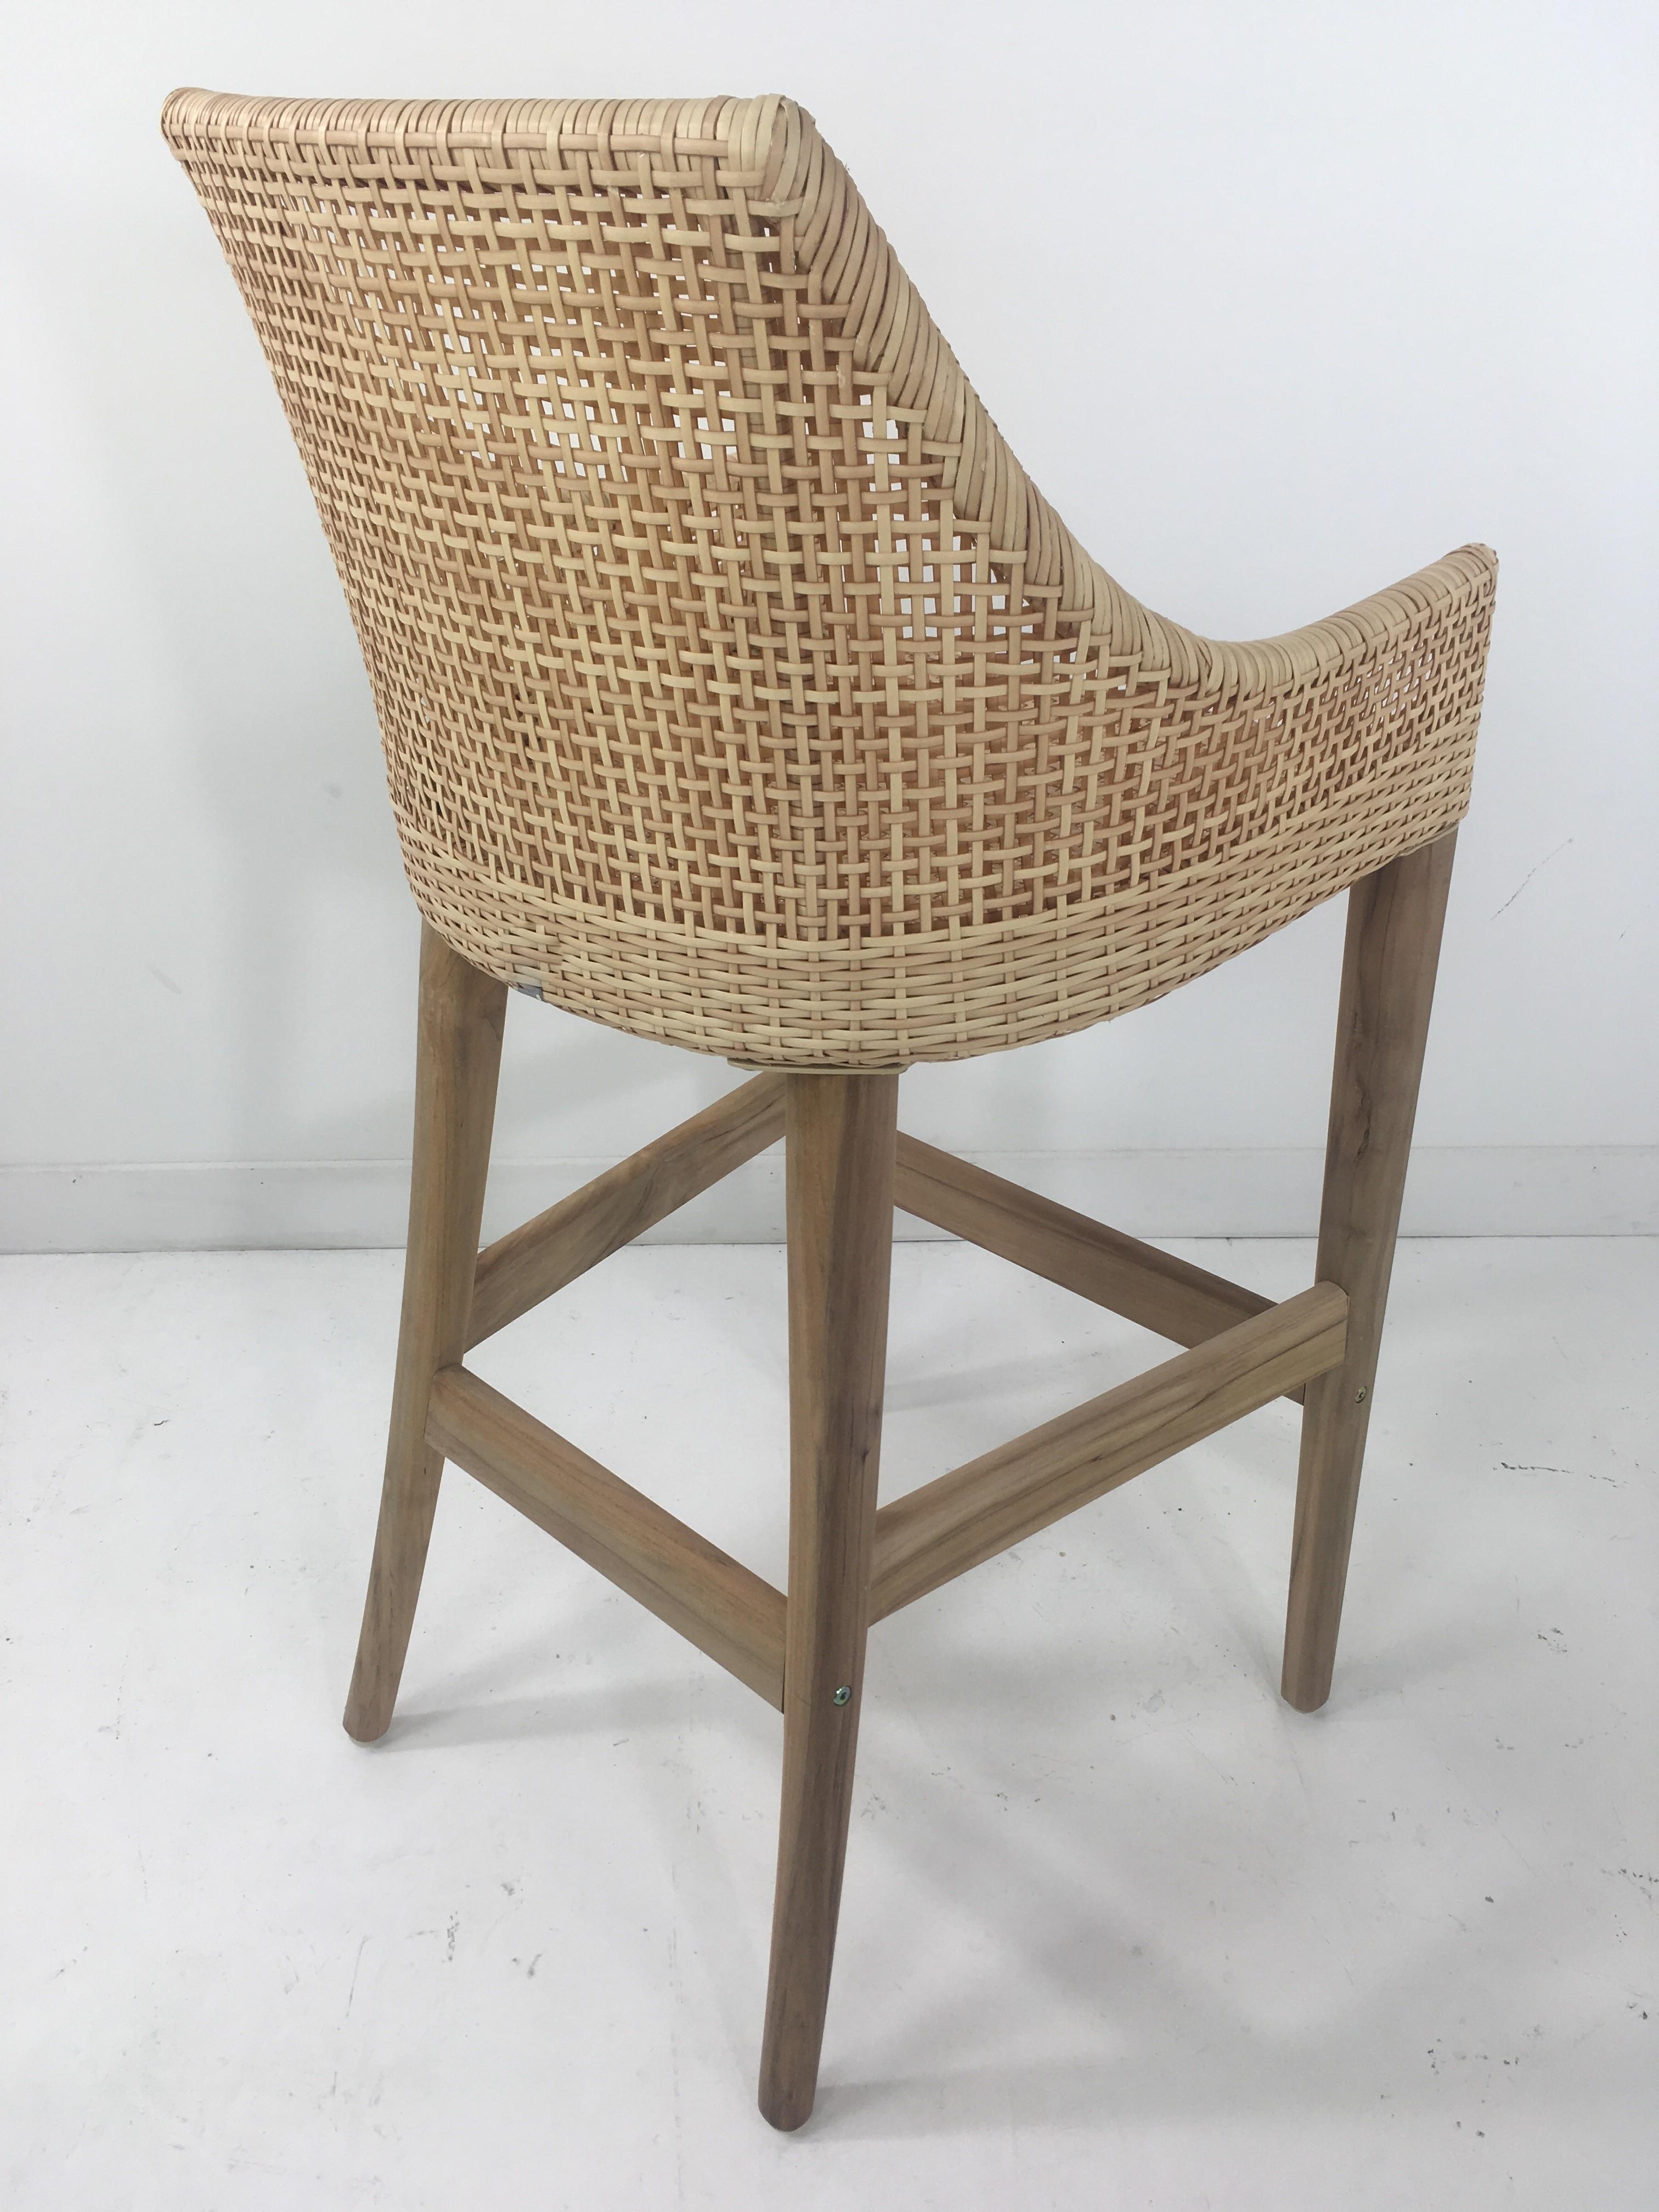 Teak Wooden and Braided Resin Rattan Effect Outdoor Bar Stool For Sale 3